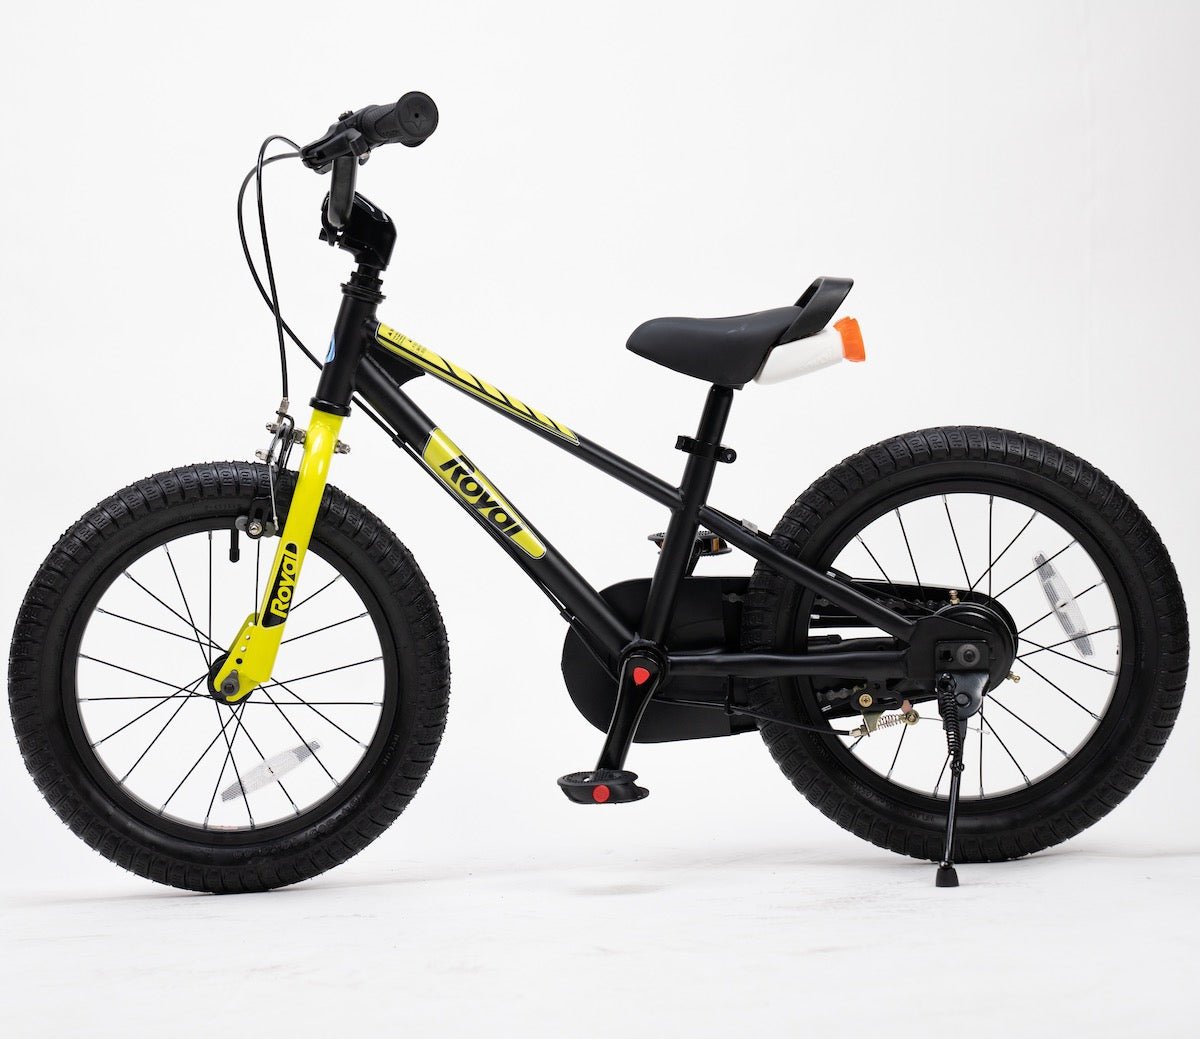 RoyalBaby EZ FreeStyle 2 in 1 Kids Pedal Bike with Balance Bike Function and 12” Wheel - Black